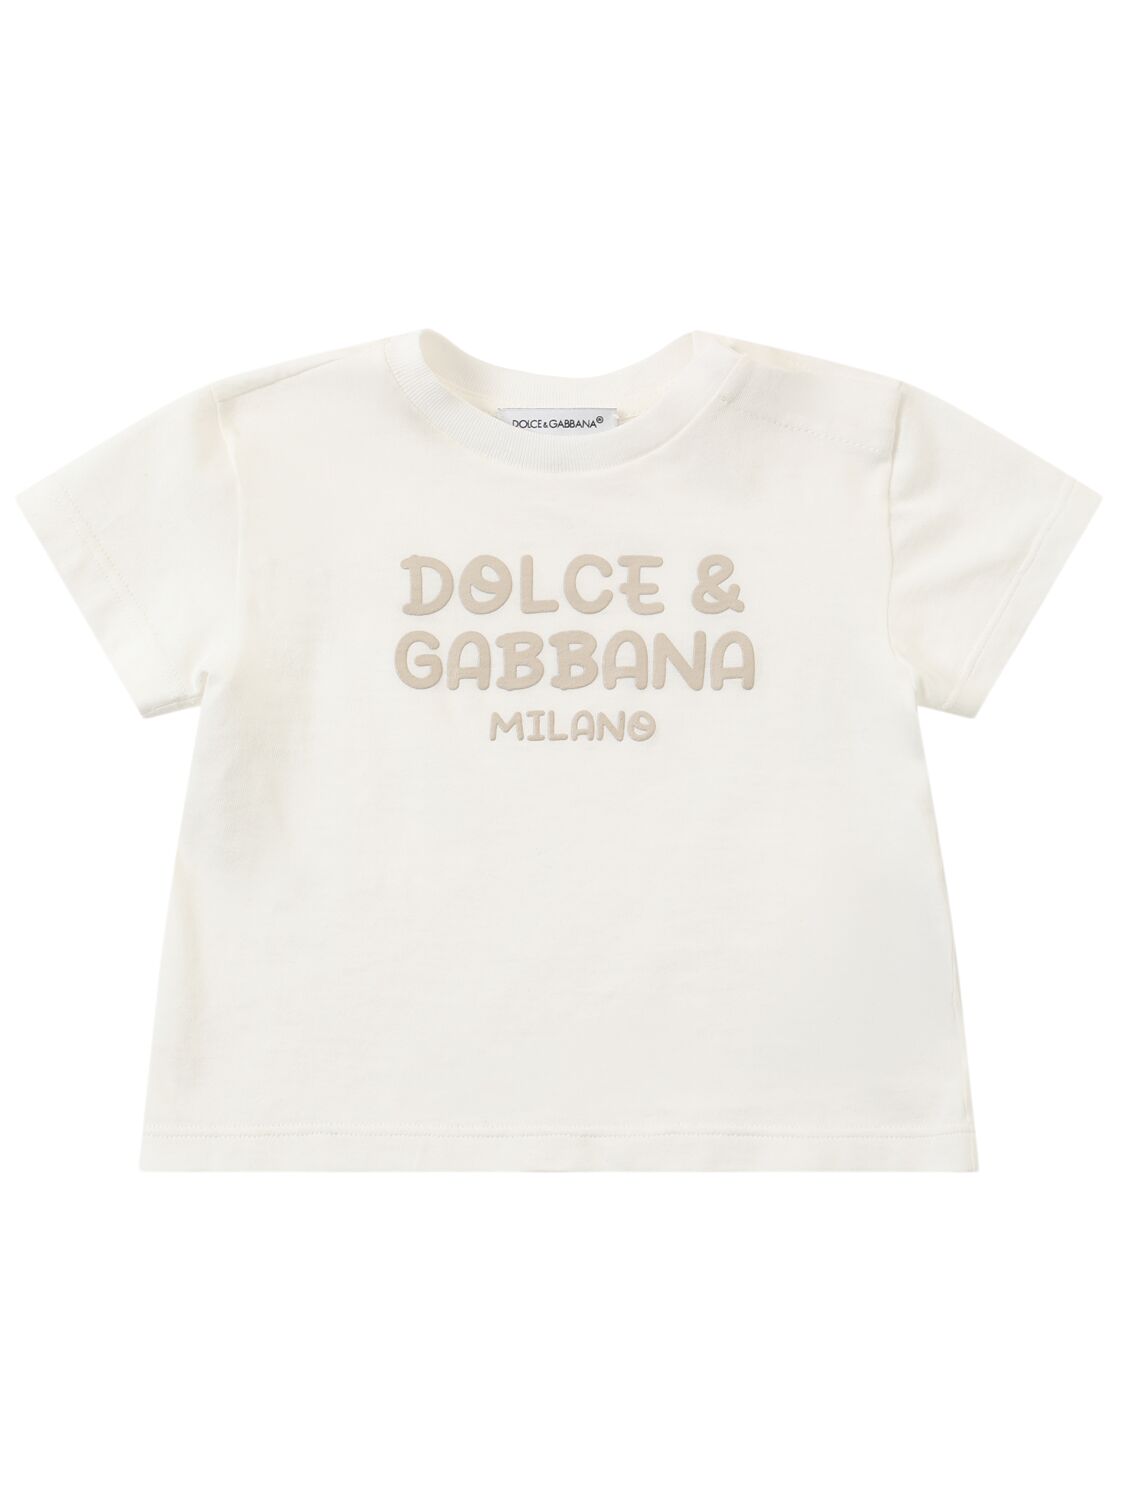 Dolce & Gabbana Embroidered Cotton Jersey T-shirt In White